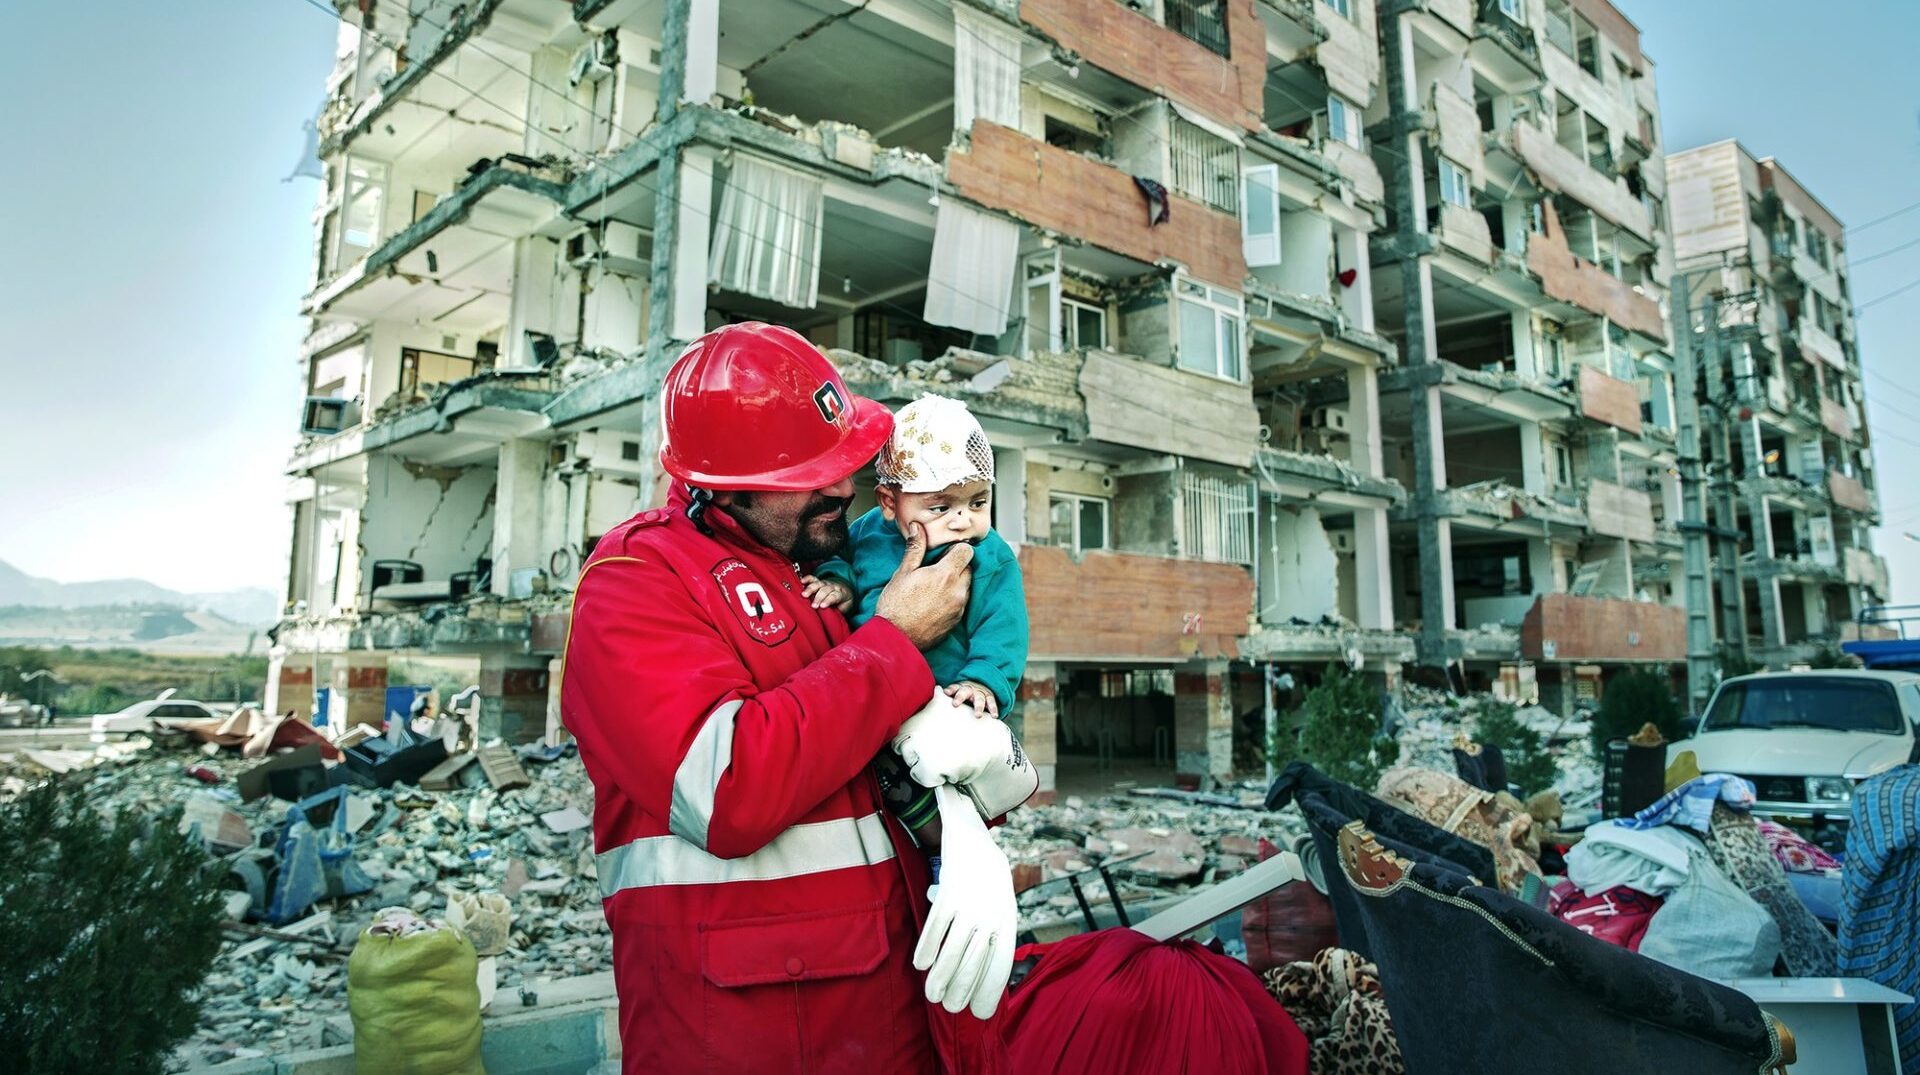 A rescue worker hold a small injured child in front of a partially destroyed apartment building